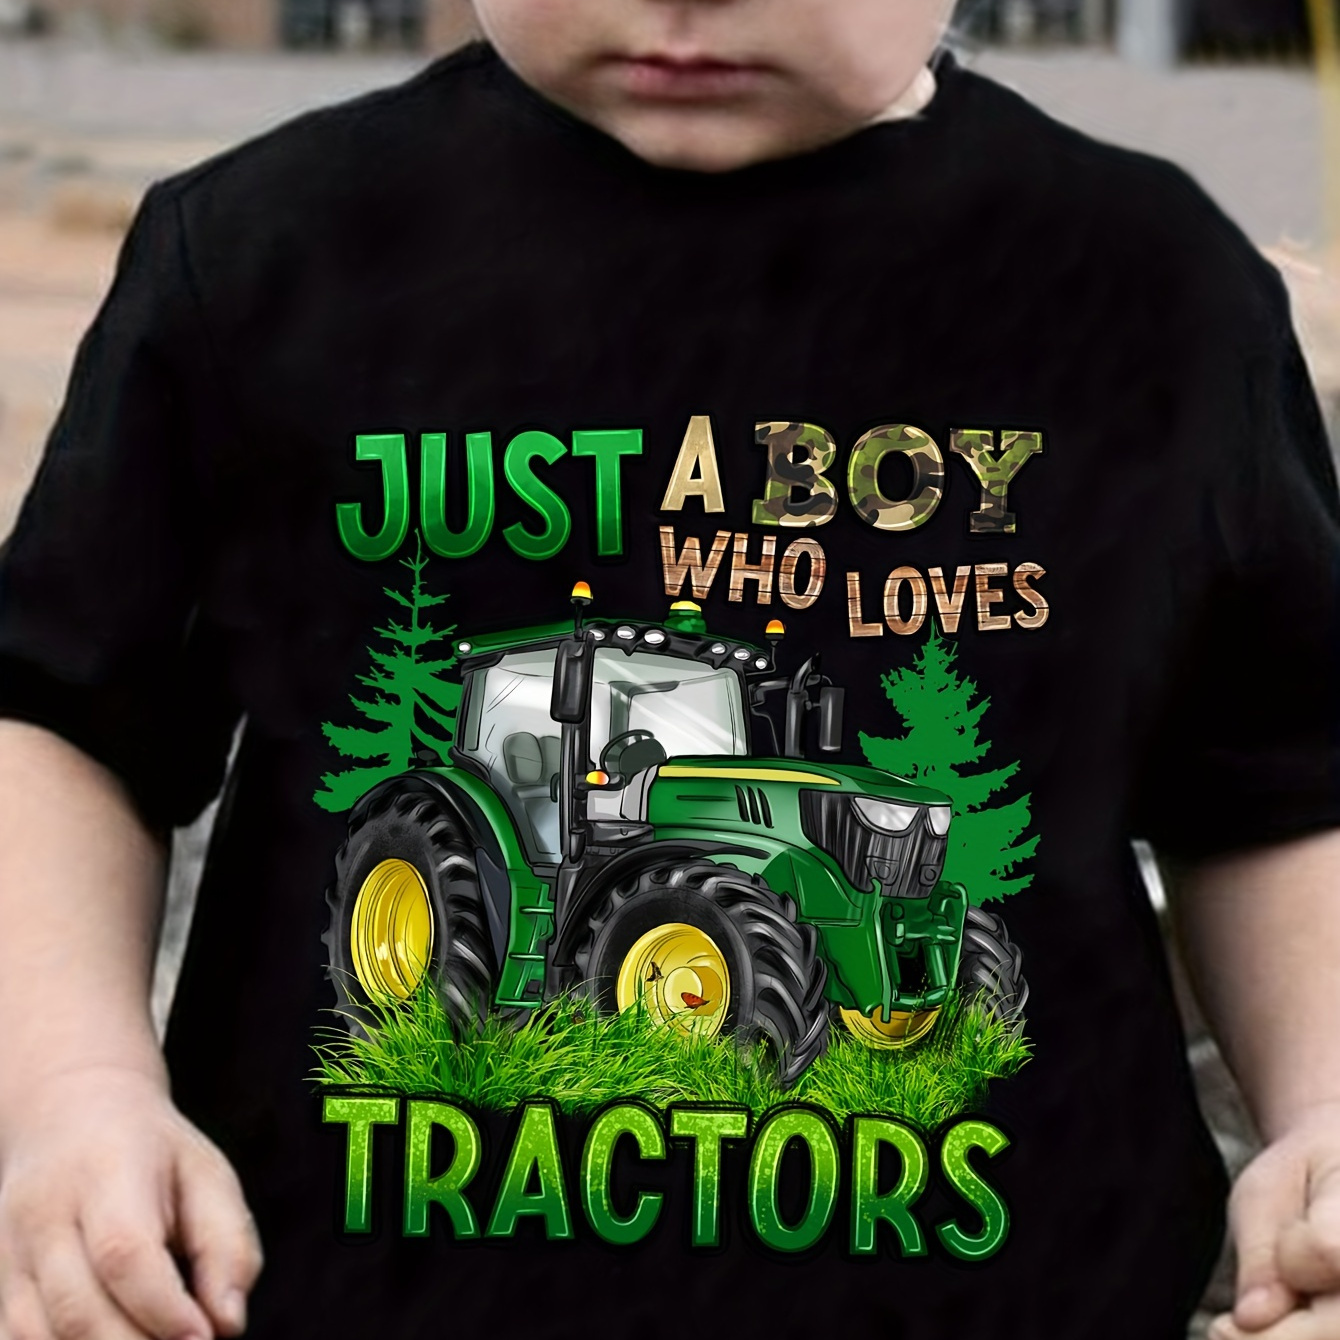 

just A Boy Who Loves Tractors" & Tractor Graphic Design T-shirt For Kids, Trendy Short Sleeve Top For Spring And Summer, Boy's Clothing